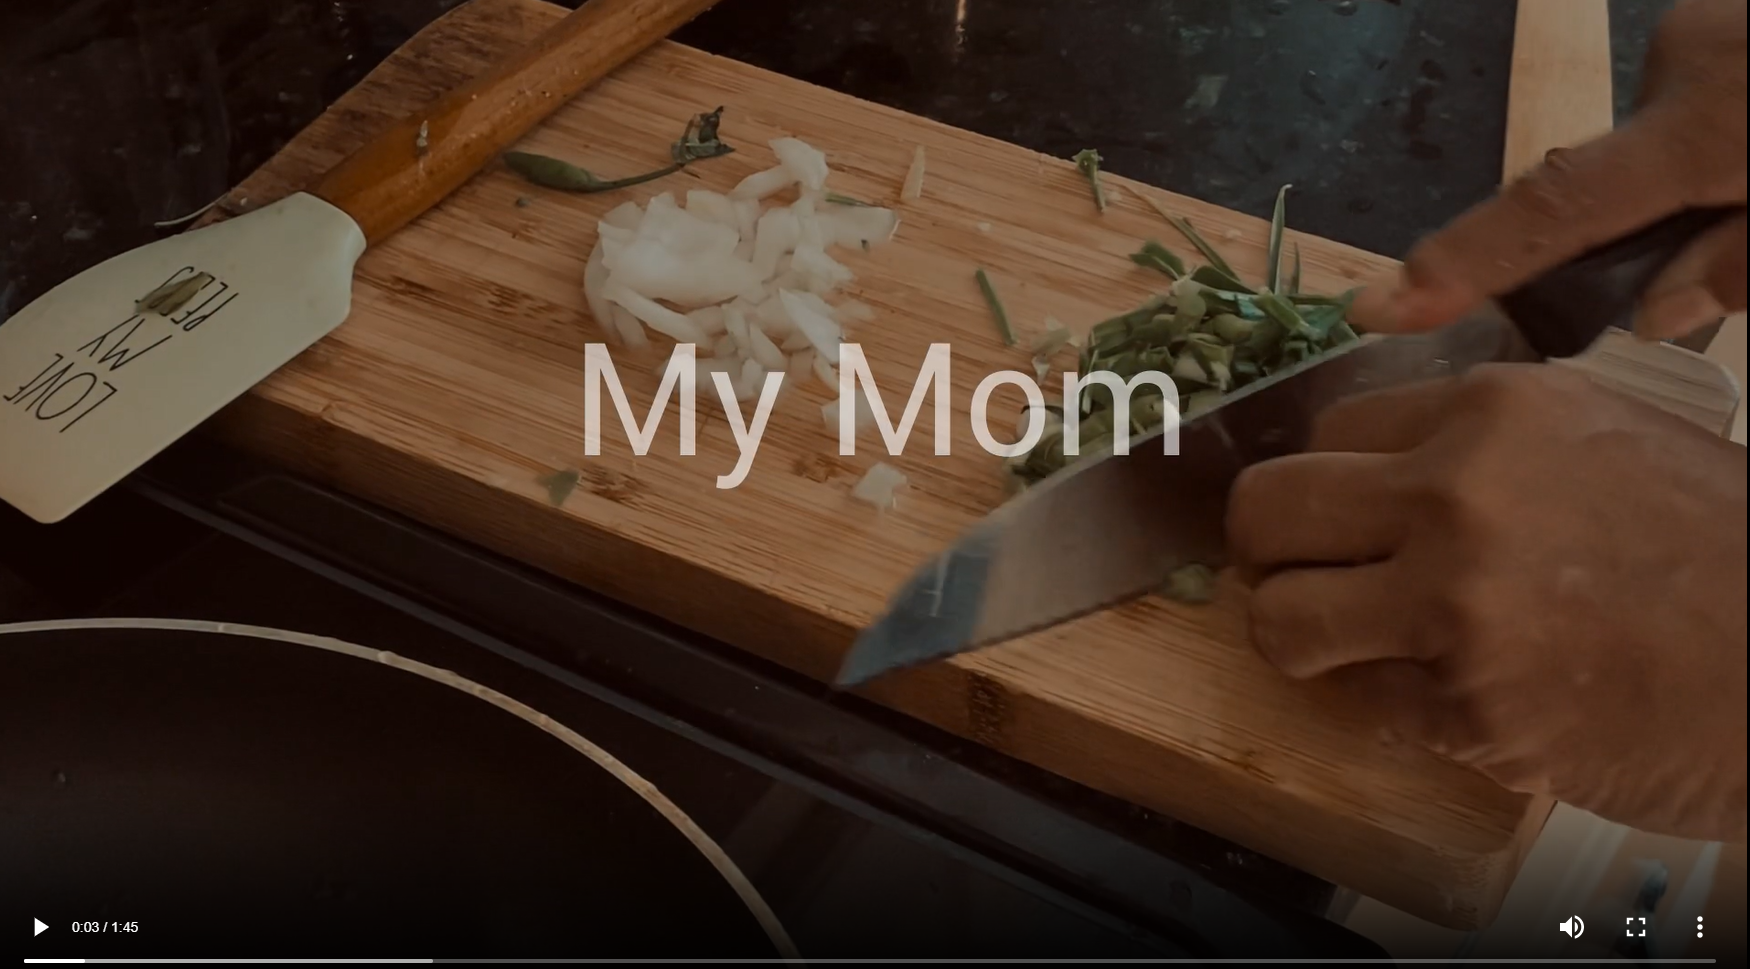 Afifah's mother's hands cutting up herbs for dinner. Title reads "My Mom"